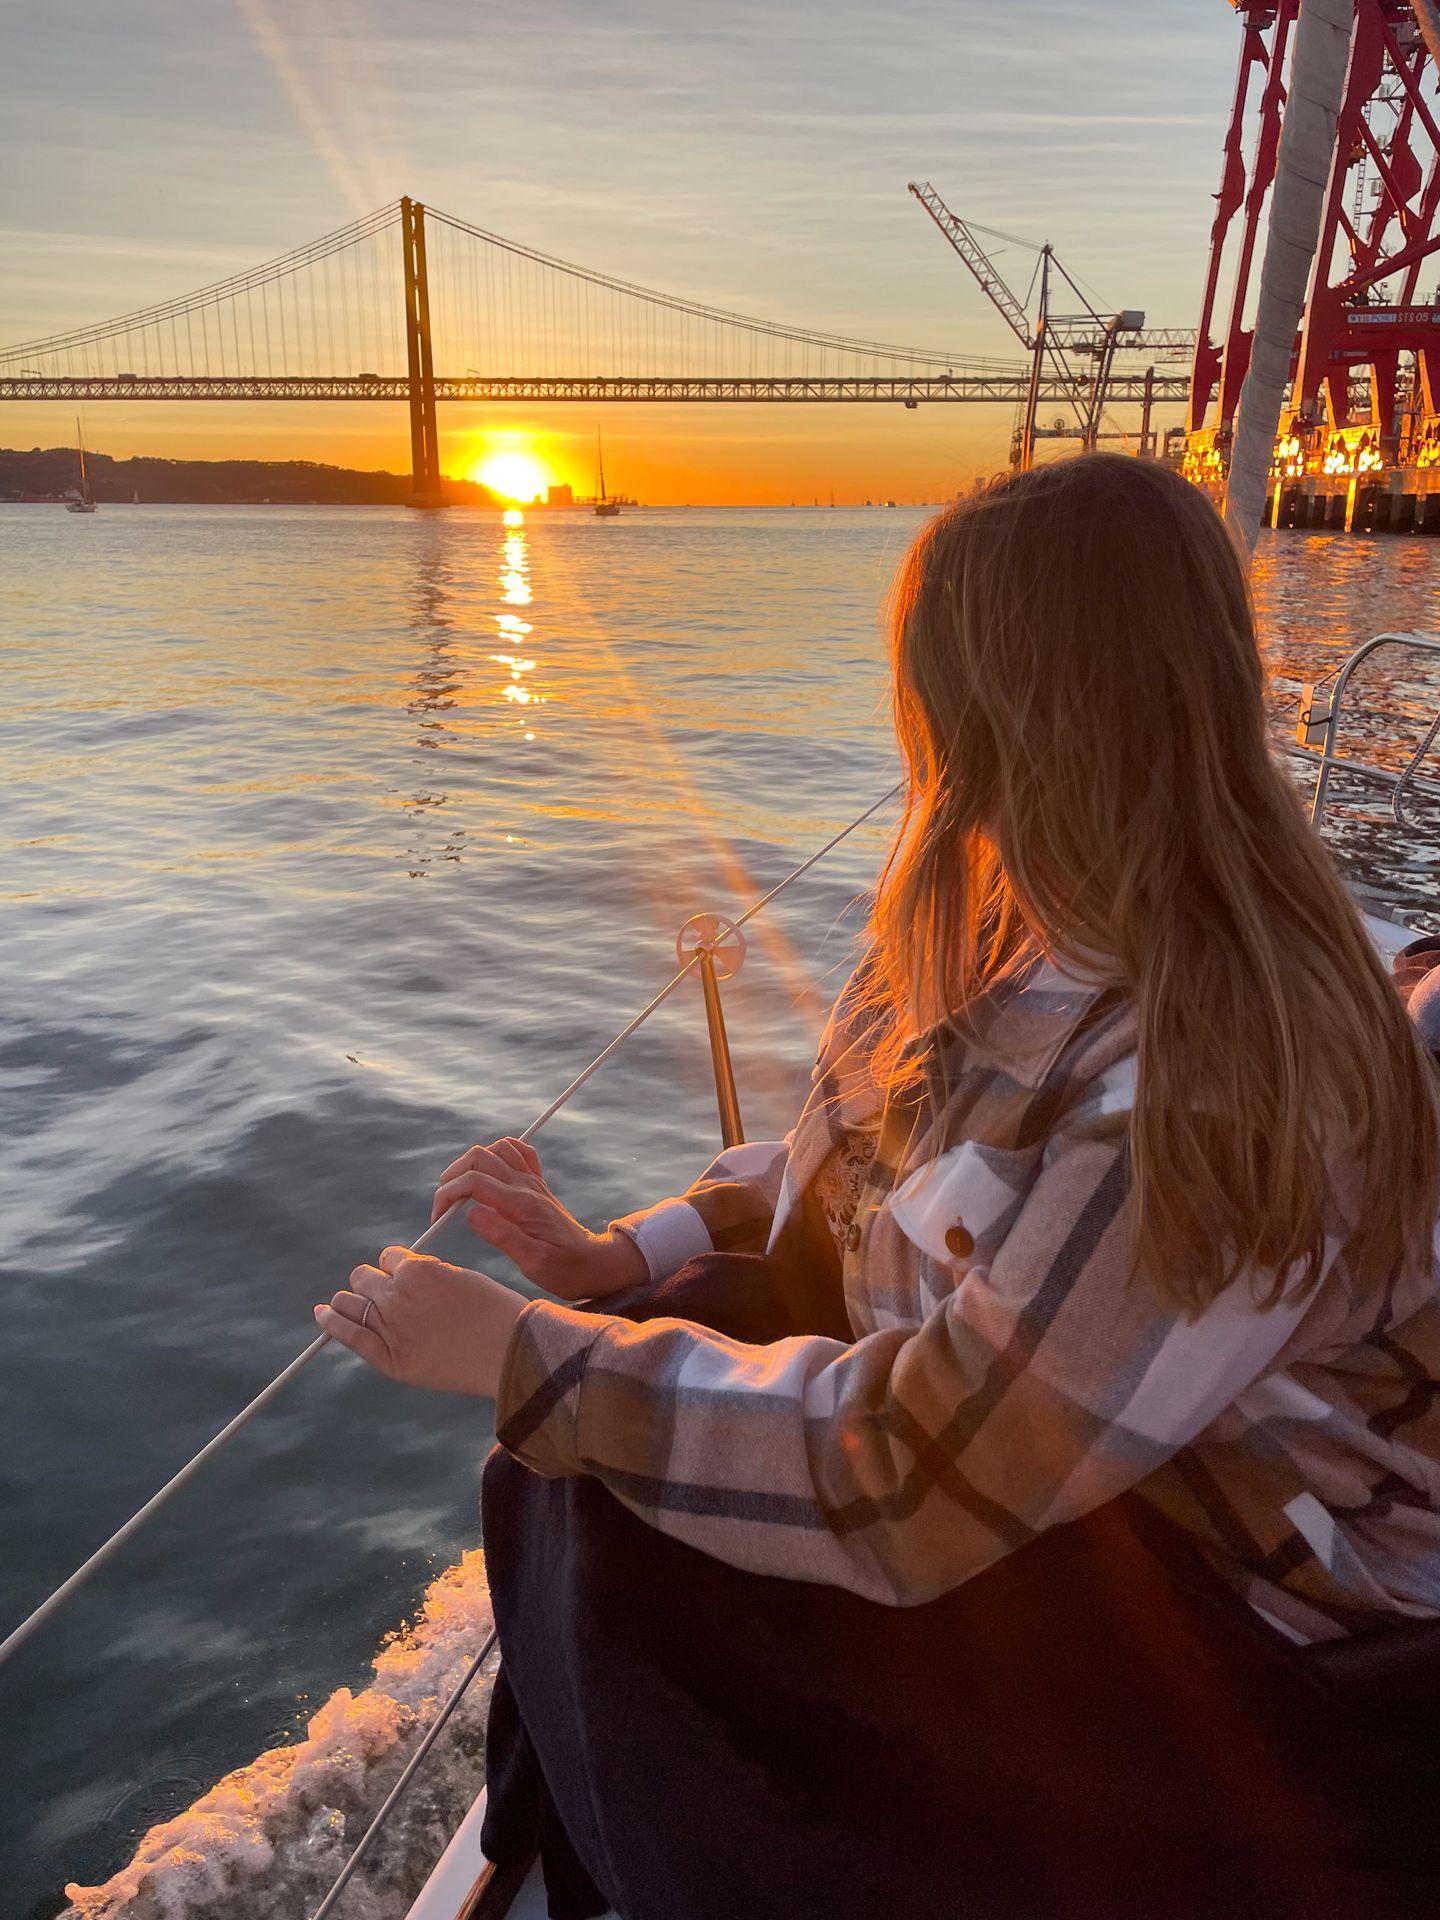 Lydia watching the sunset from a boat. There is a bridge in the distance.